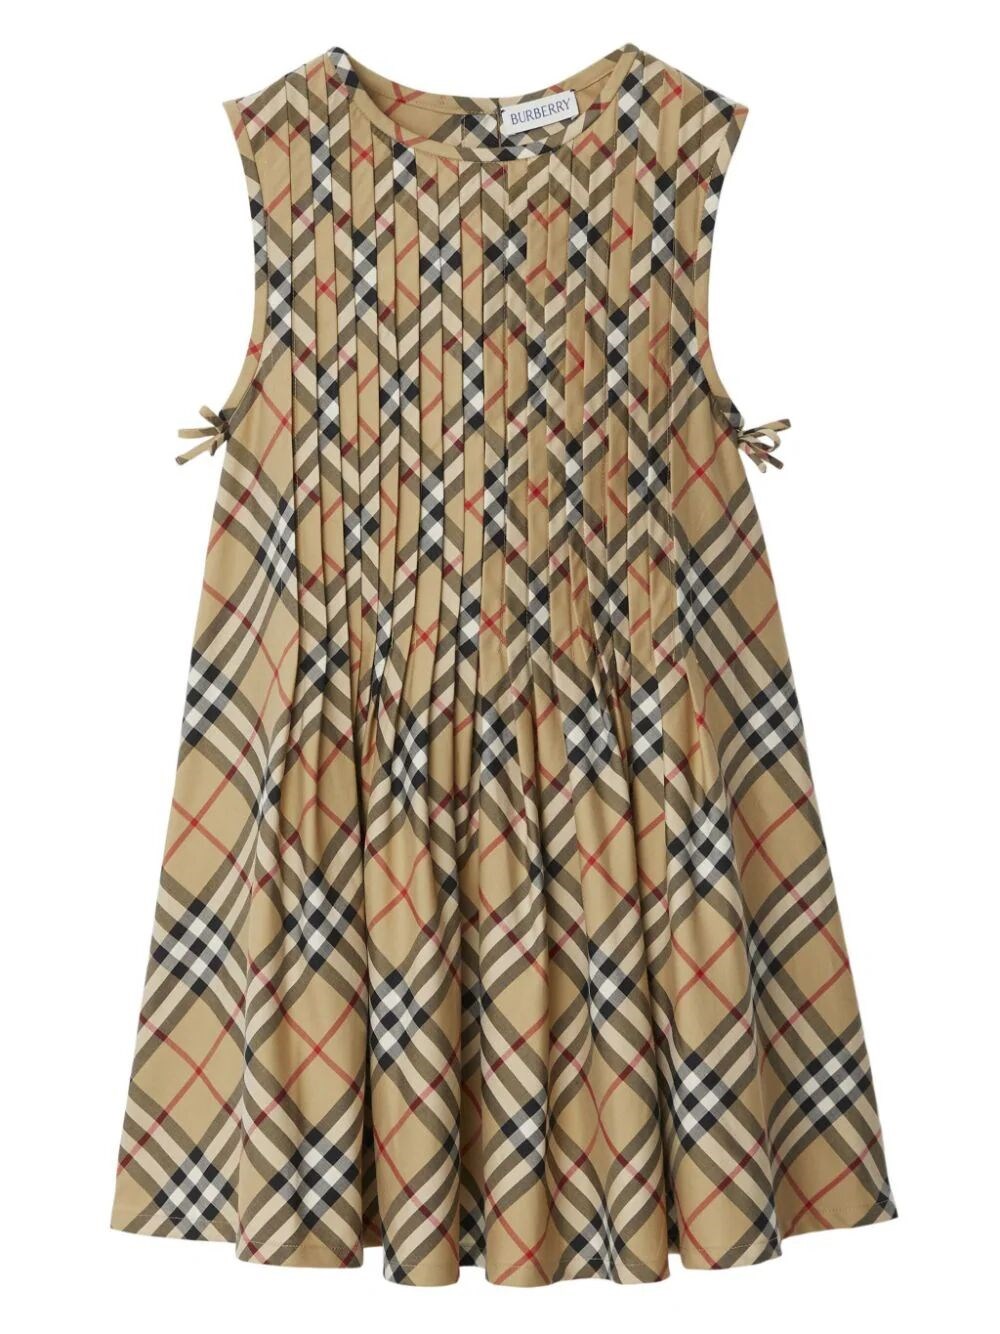 BURBERRY PLEATED CHECK DRESS